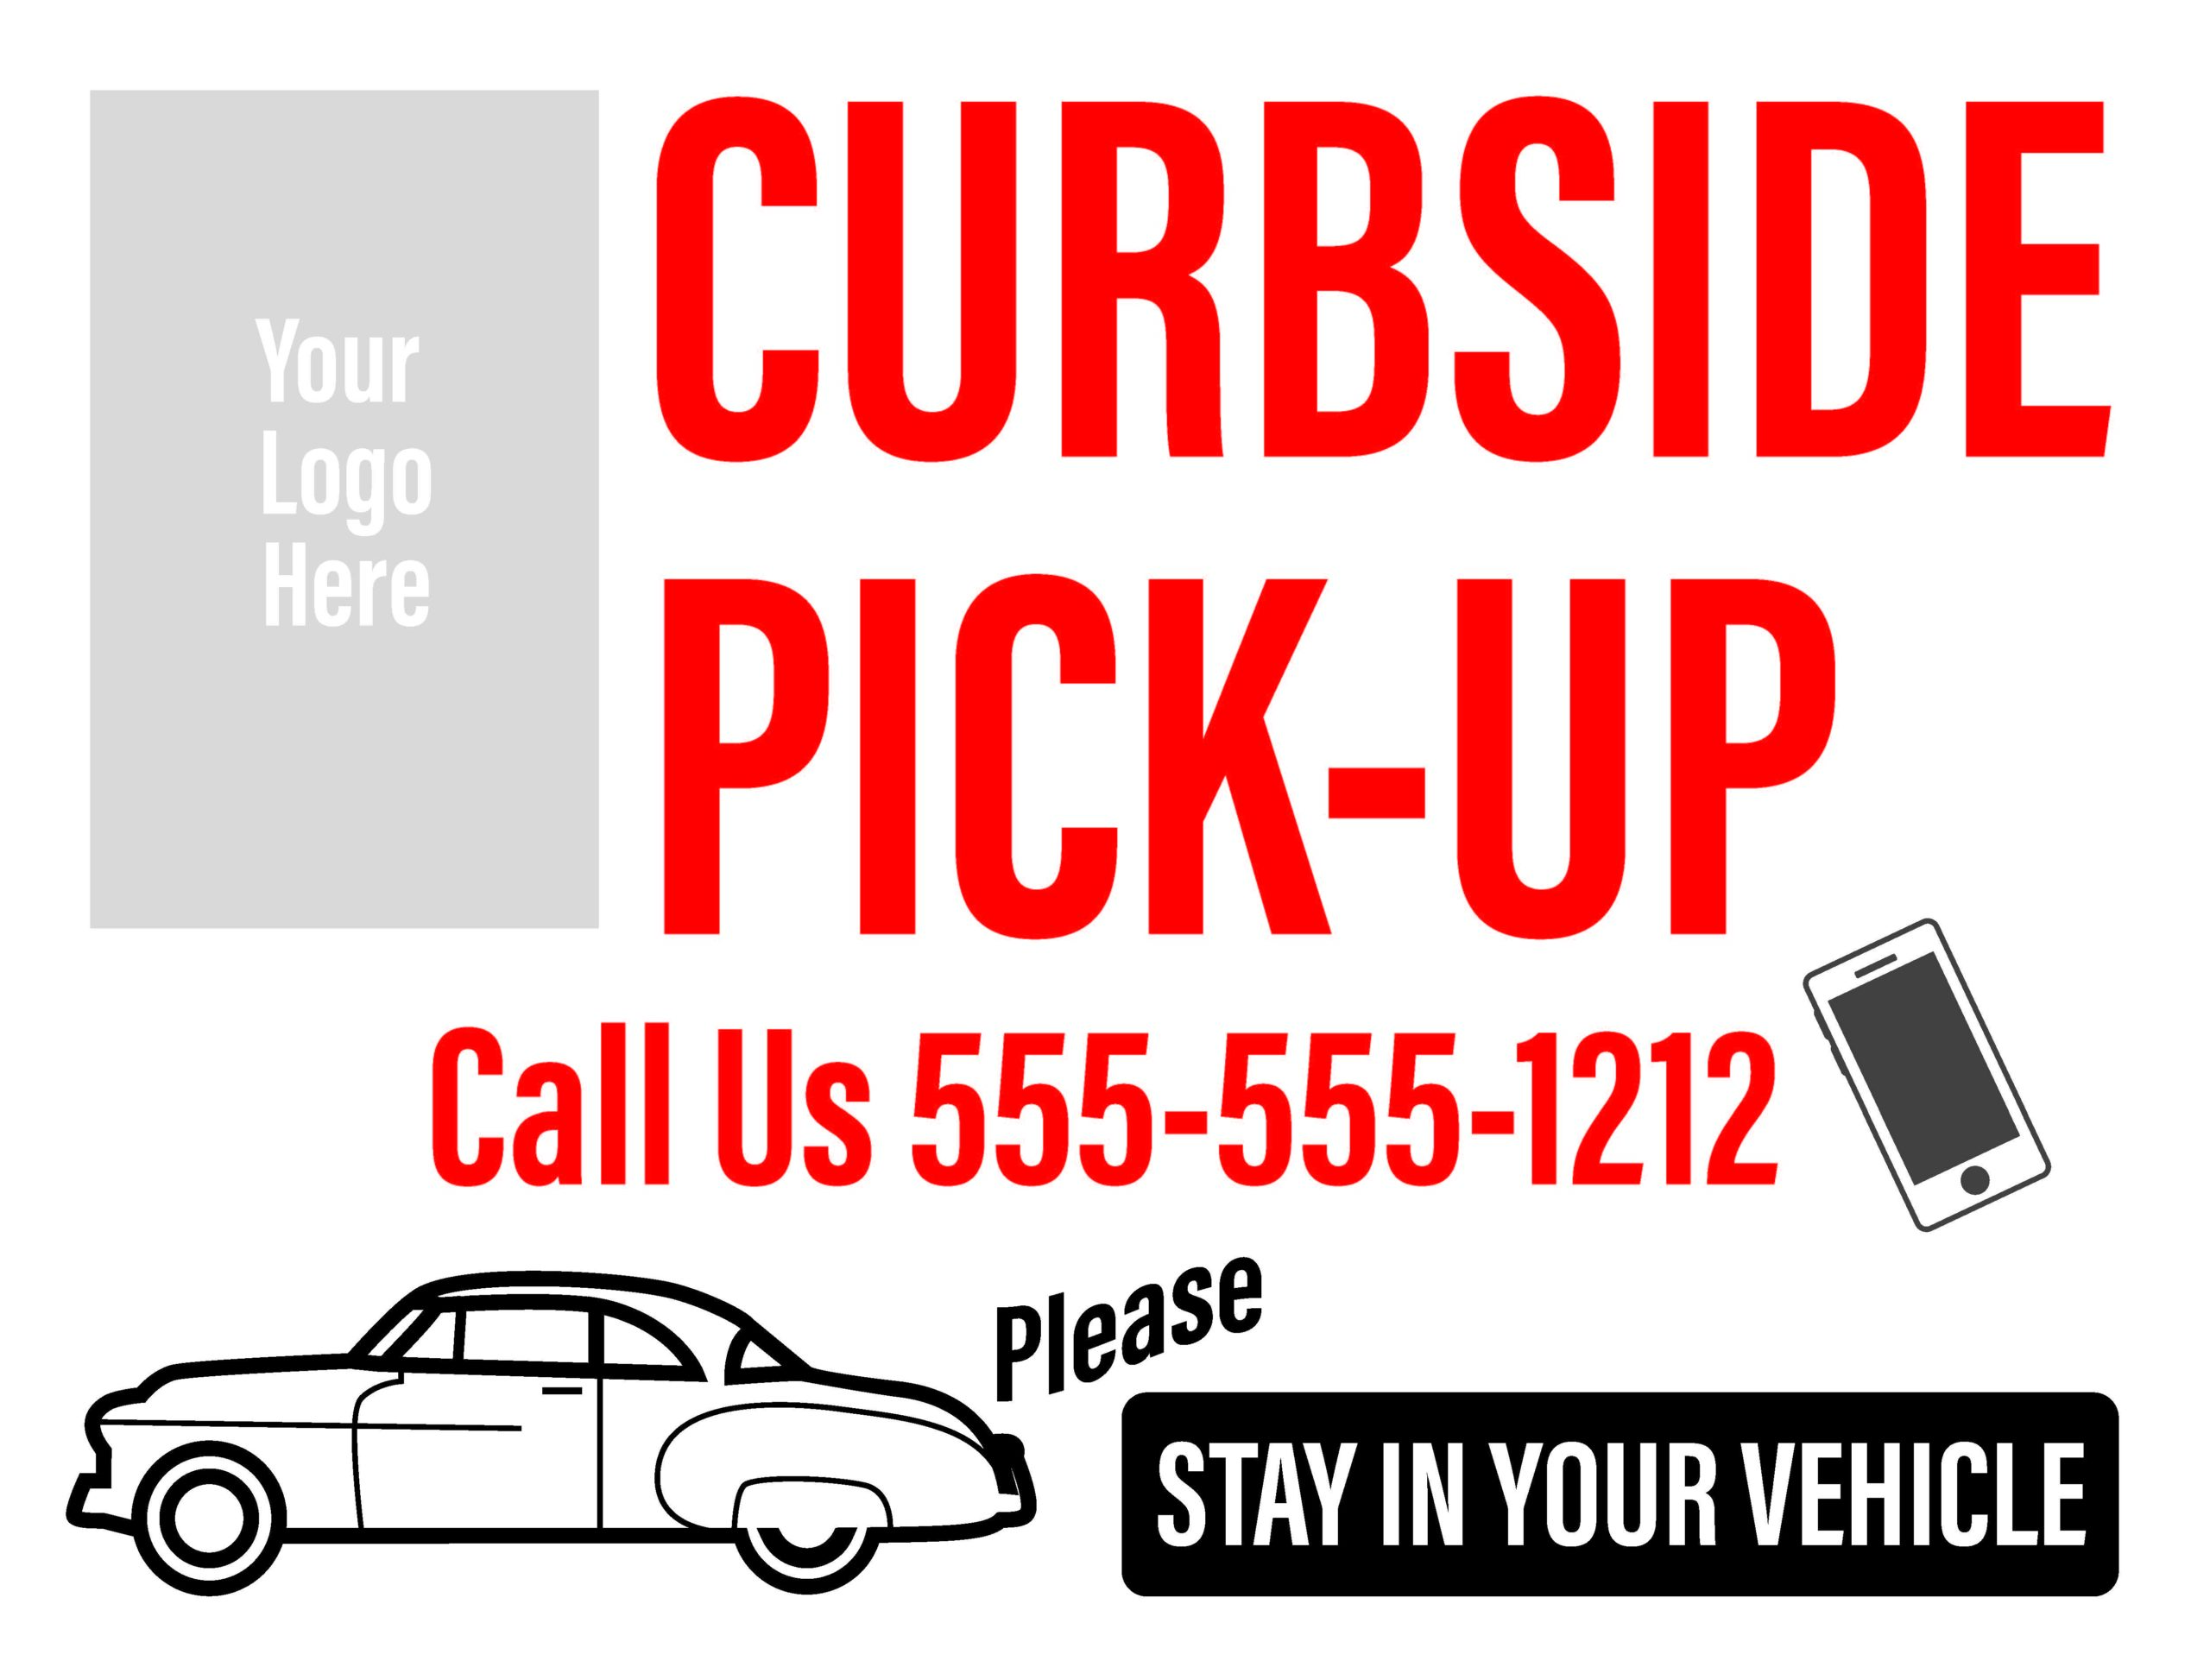 Curbside Pickup Signs 24”x 18”, printed on White Coroplast (outside) #5